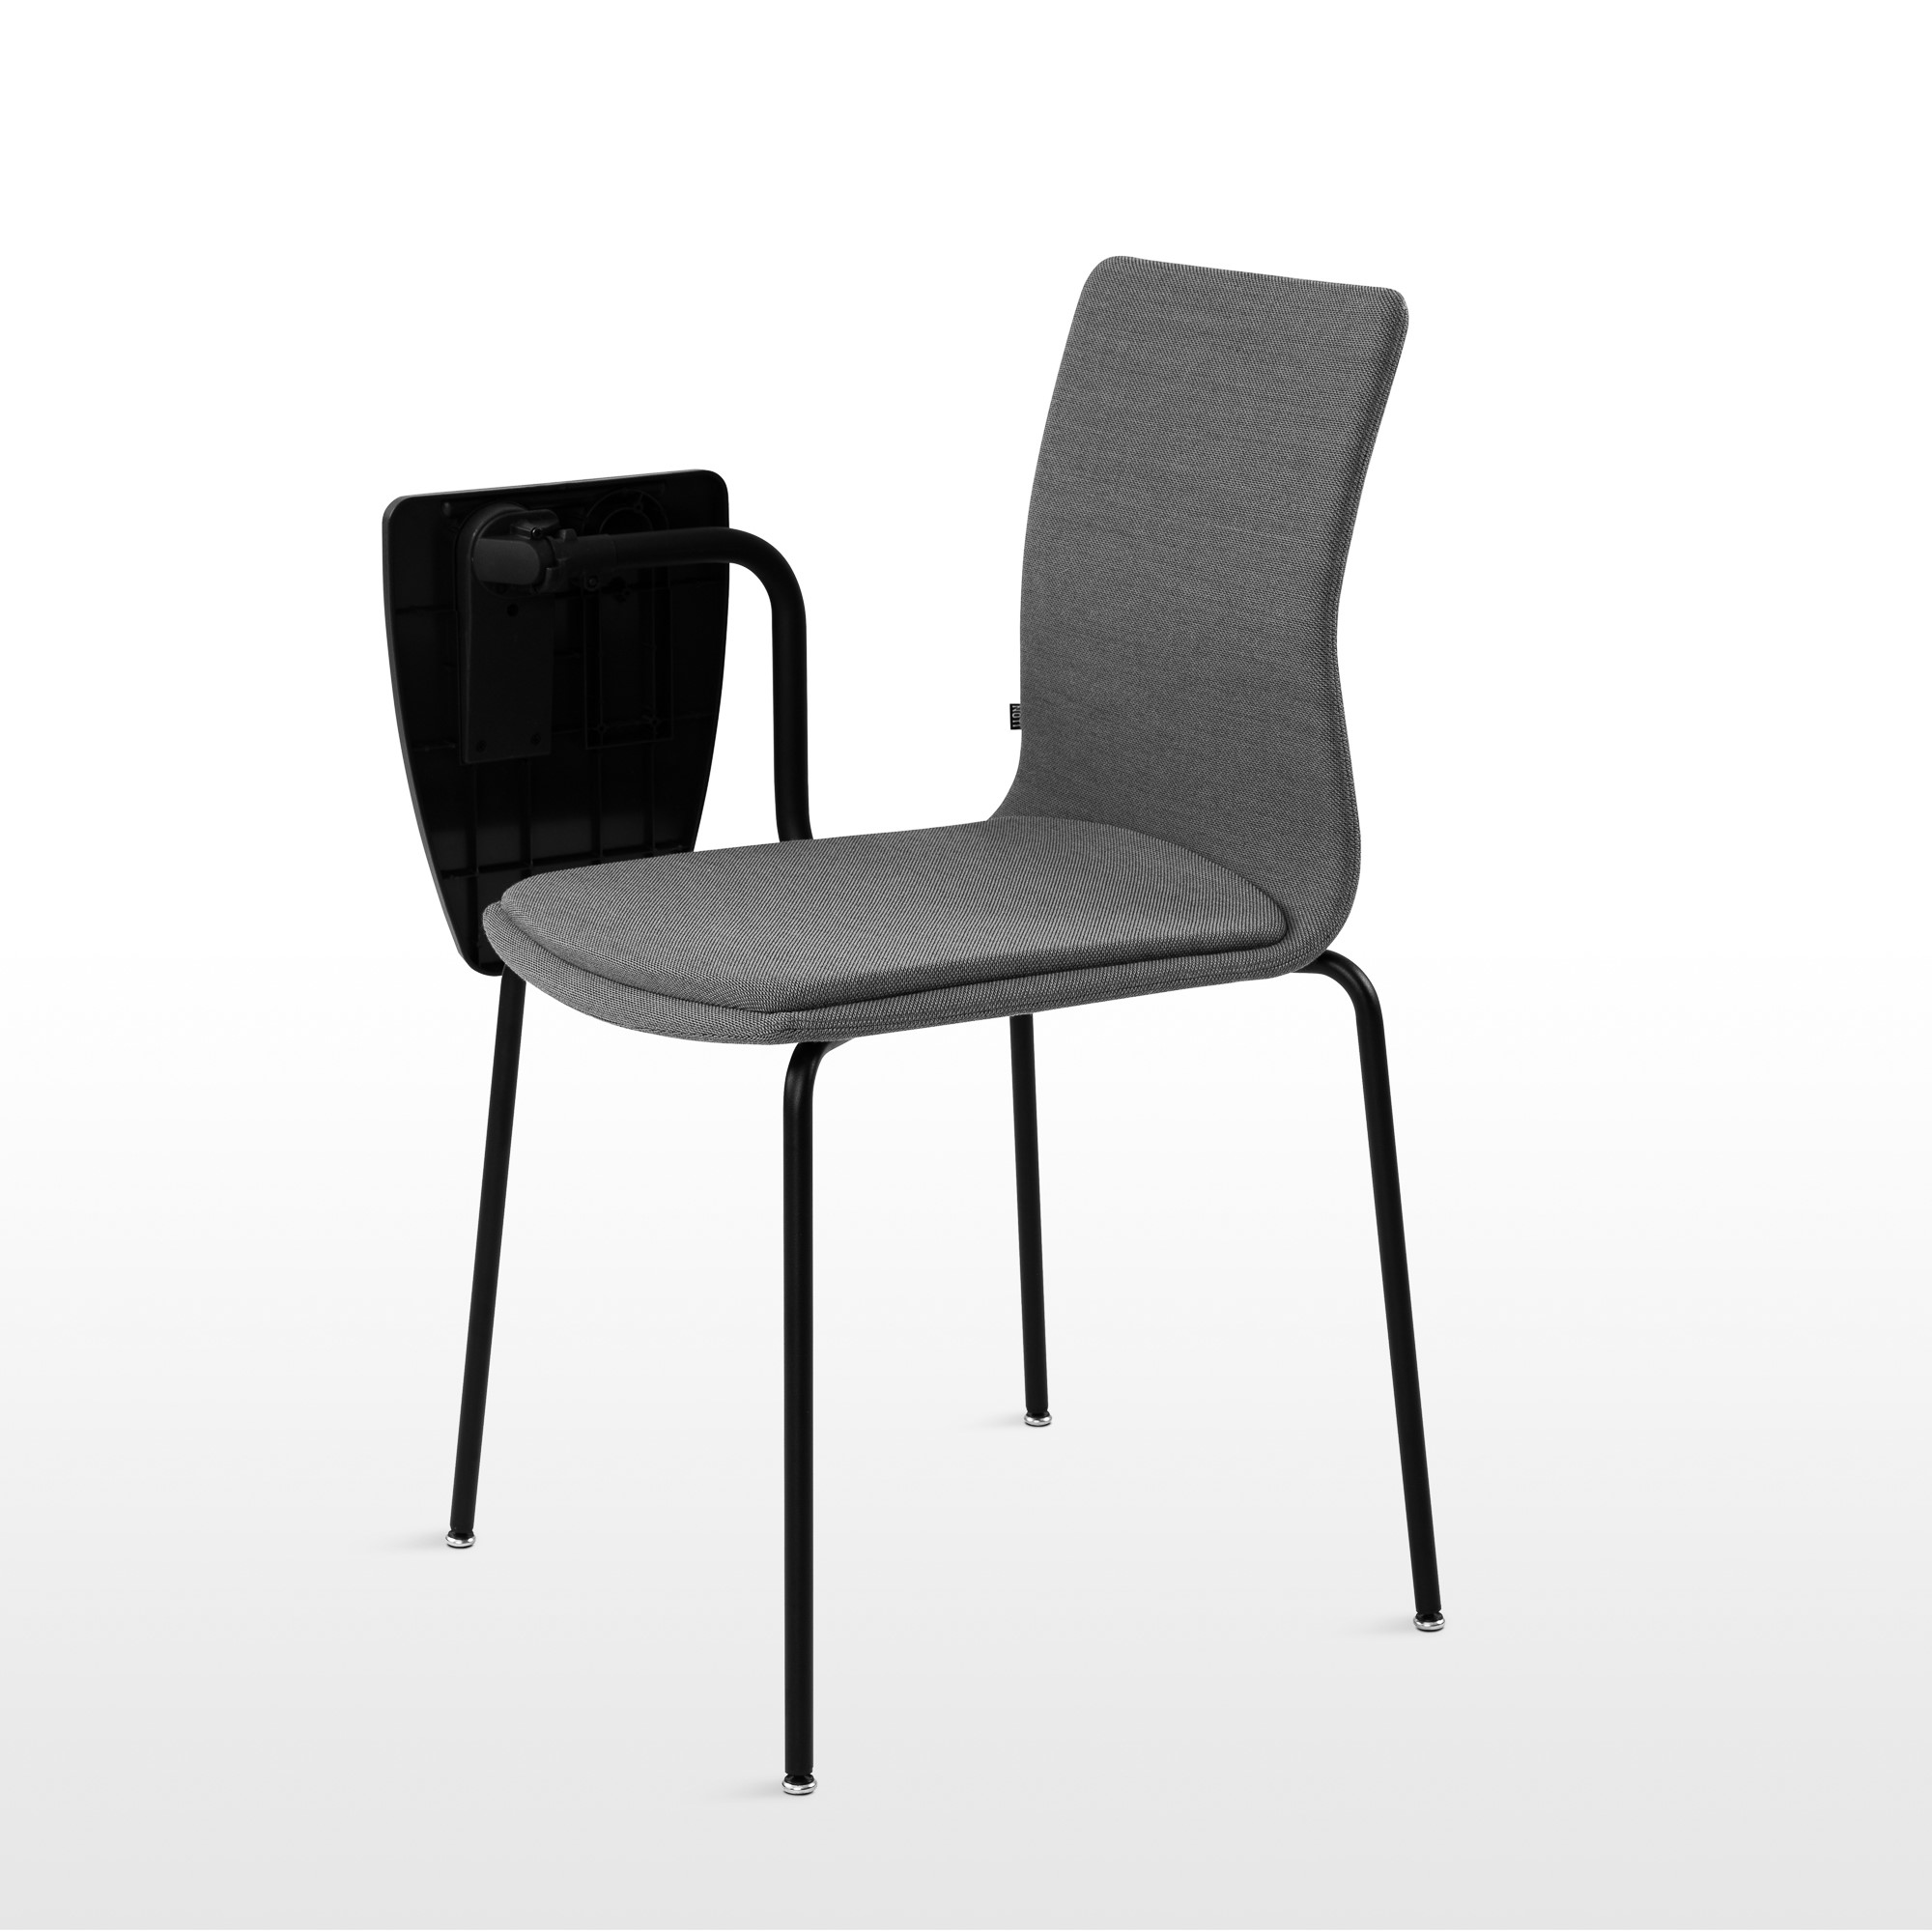 LINAR_packshot_chair with table1